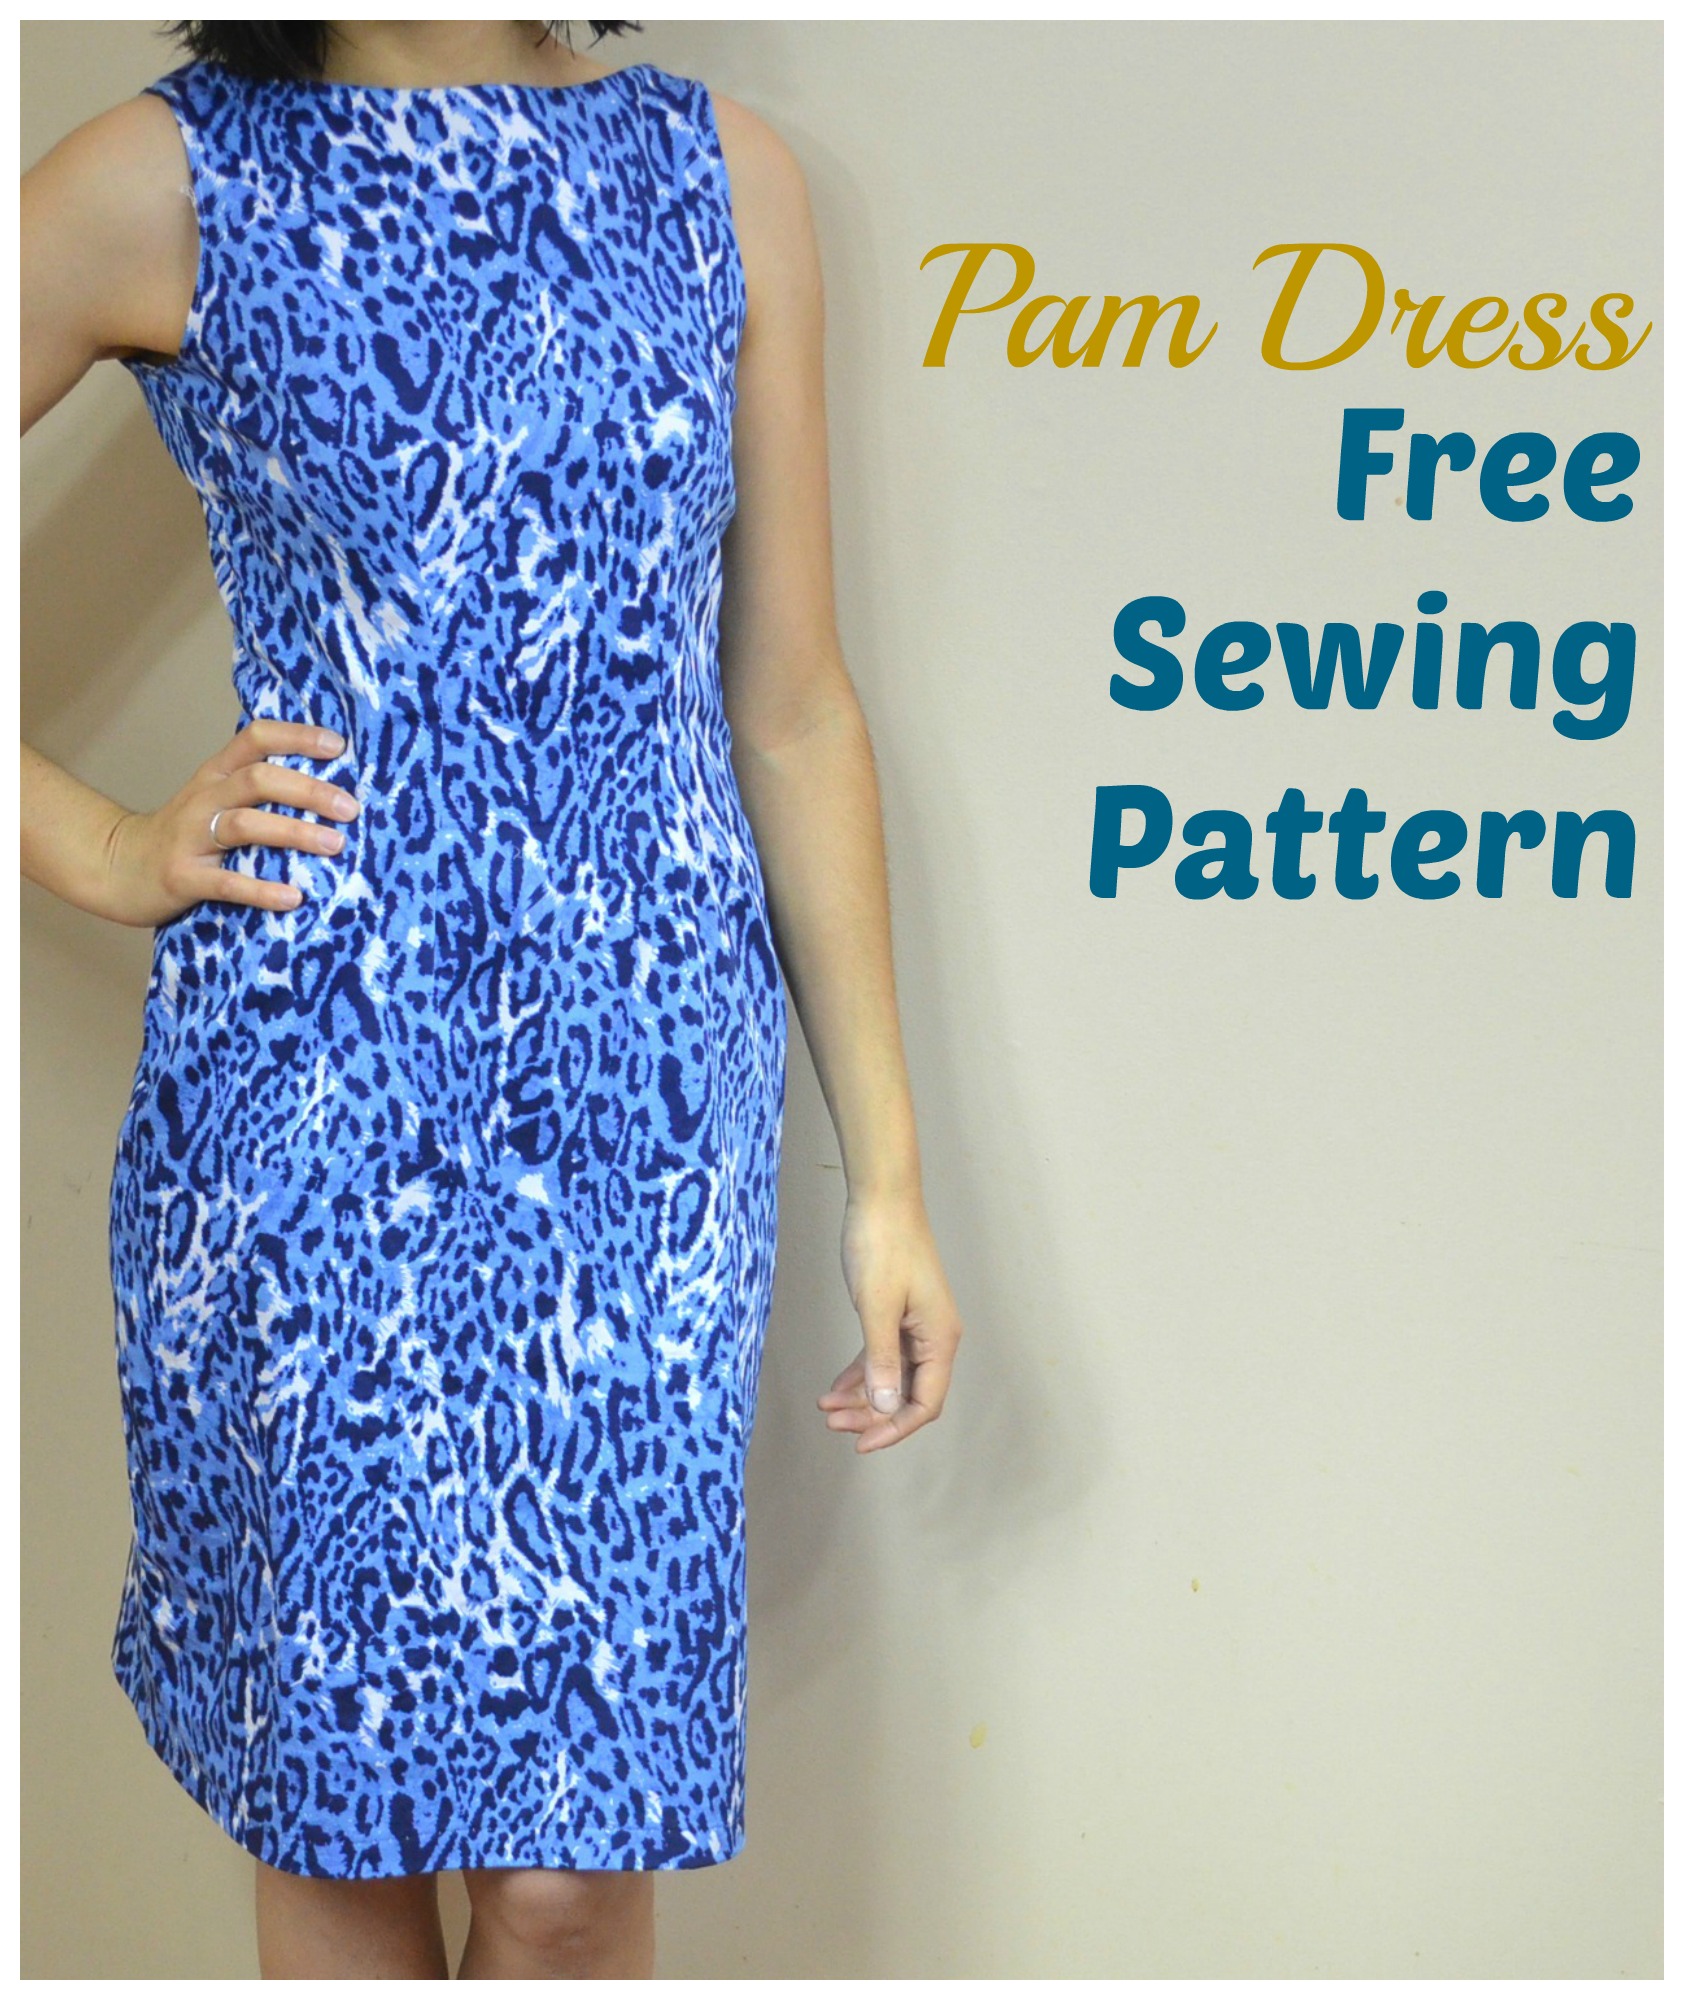 Pam Dress: free sewing pattern Sewing Projects BurdaStyle com